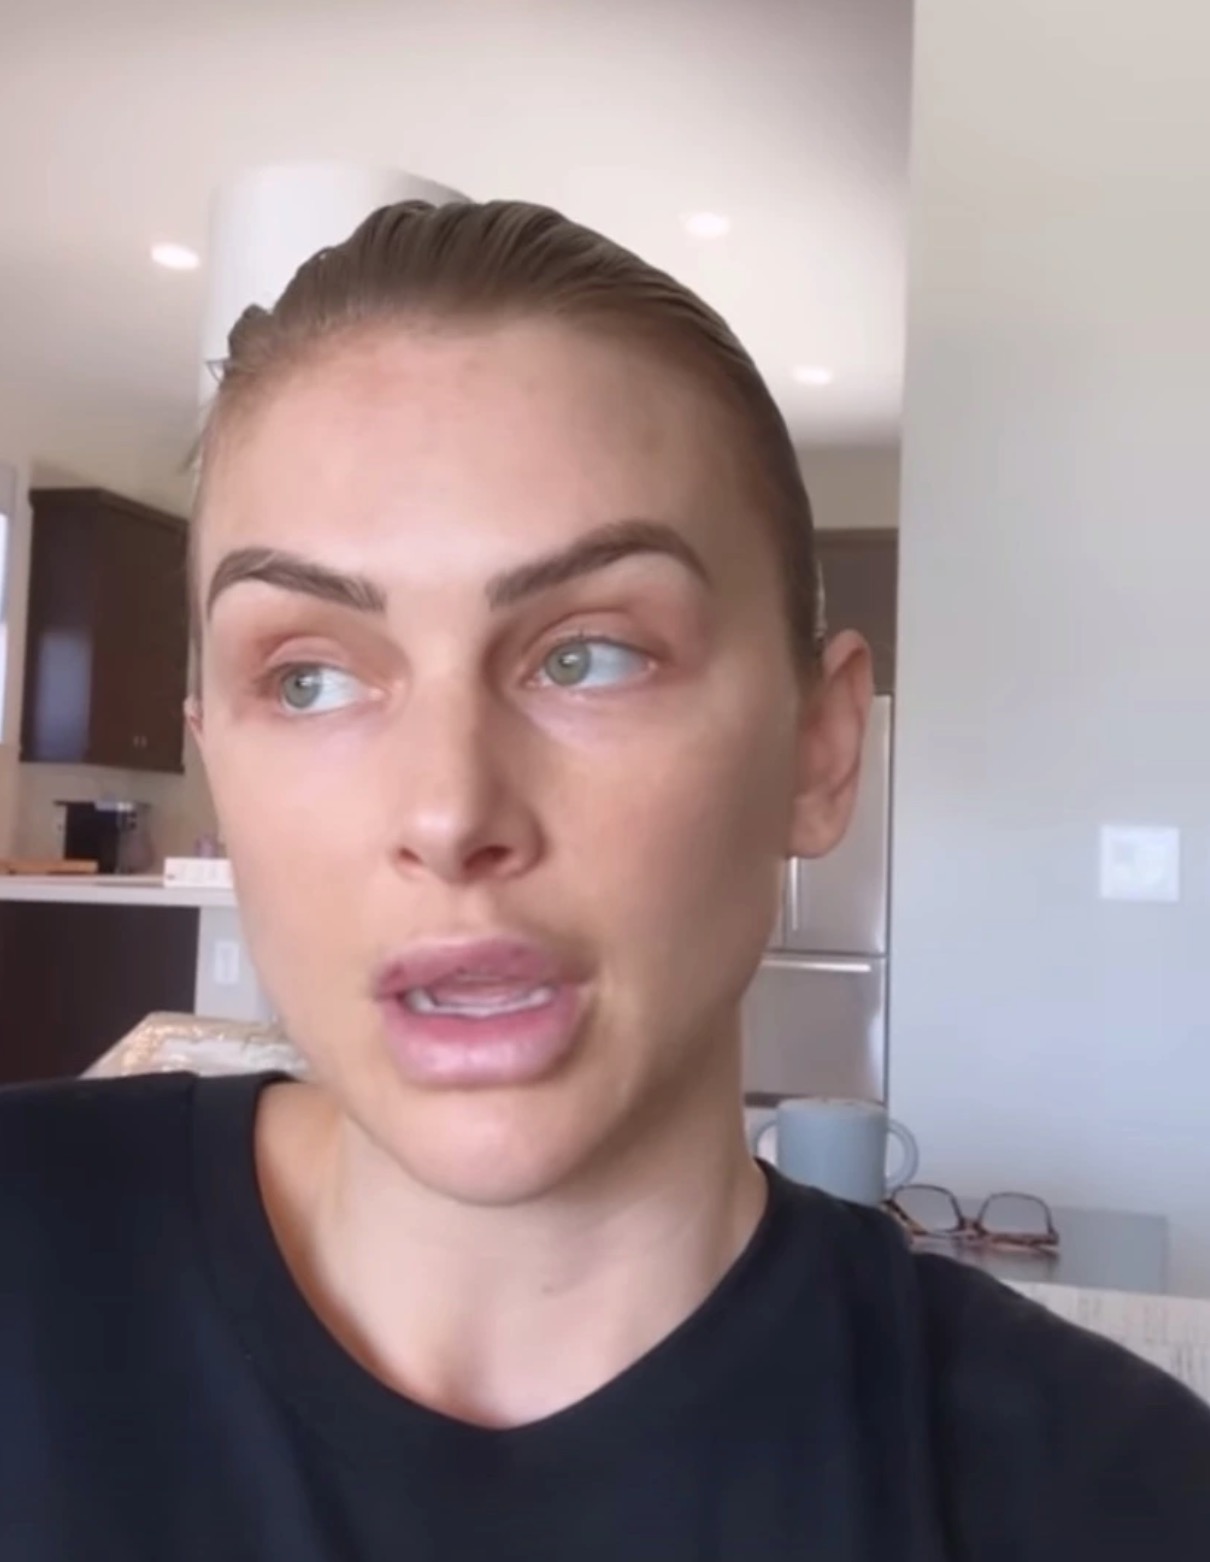 VPR's Lala Kent Lip Injections: Bruised, Swollen Photos | Life & Style